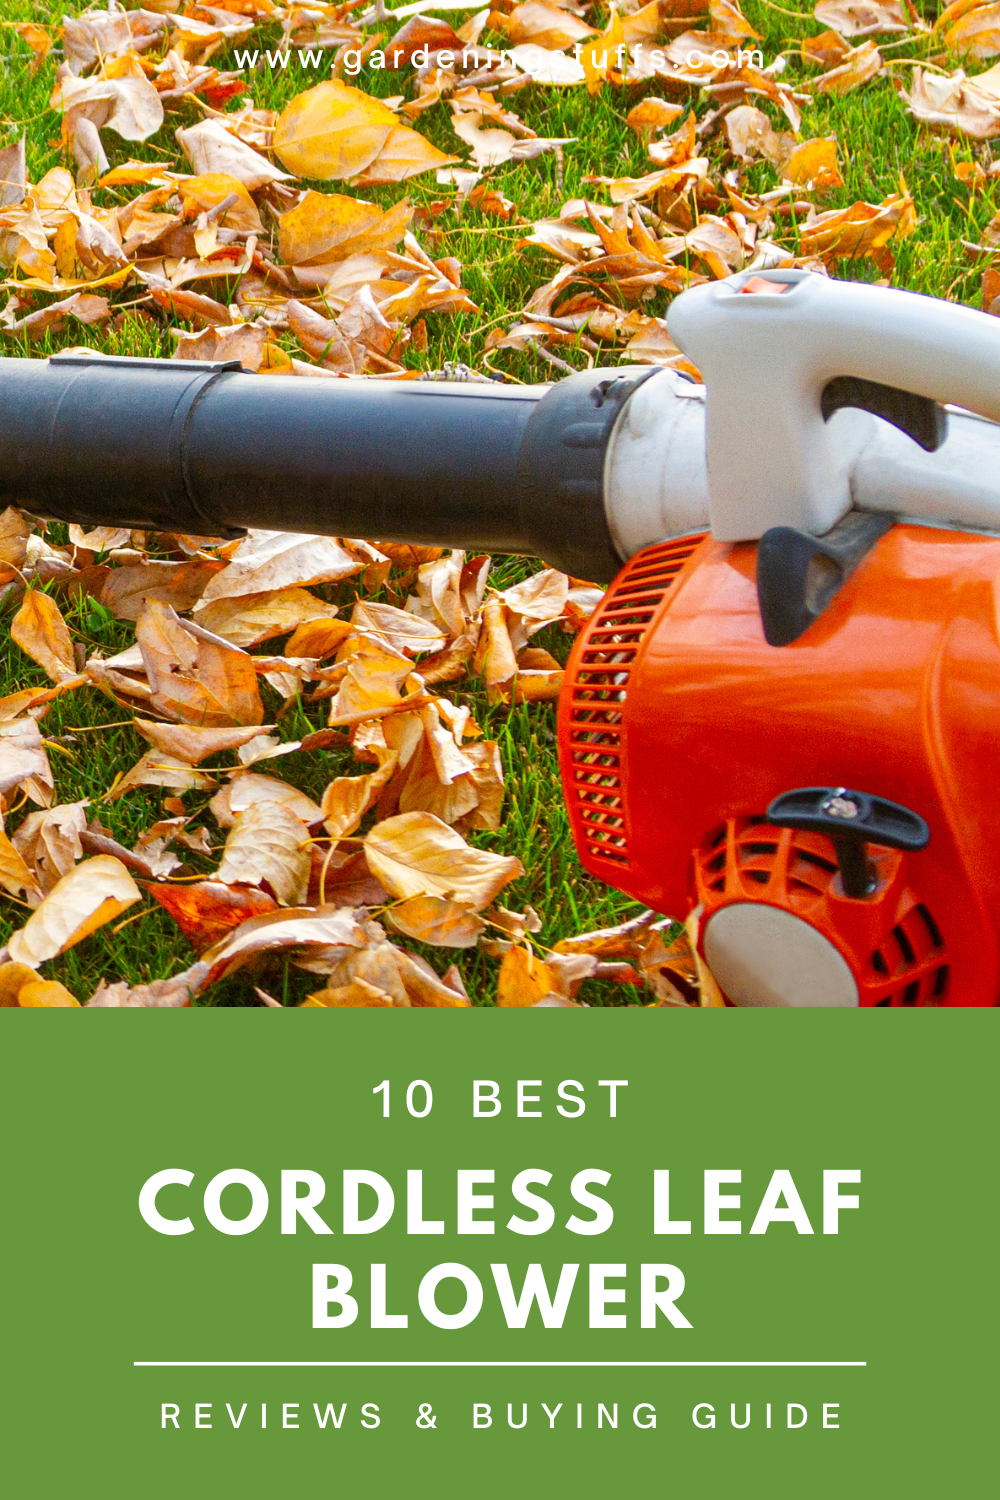 We have compiled the best cordless leaf blowers and an extensive guide on what to do when shopping around. In no particular order, these, in our opinion, will make the best cordless leaf blowers for you.